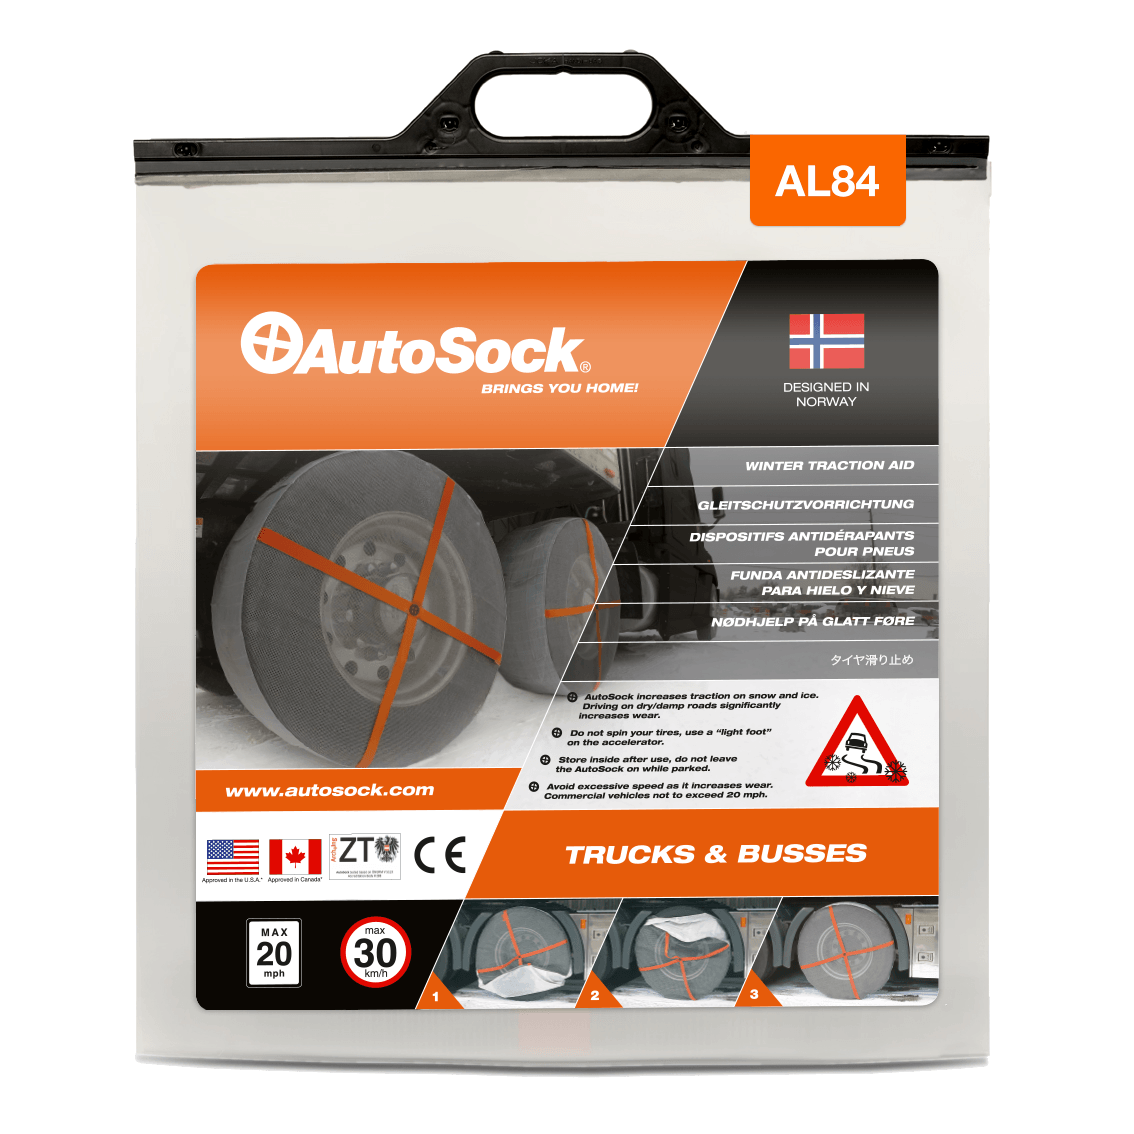 Product Packaging of AutoSock AL 84 AL84 for trucks (front view)